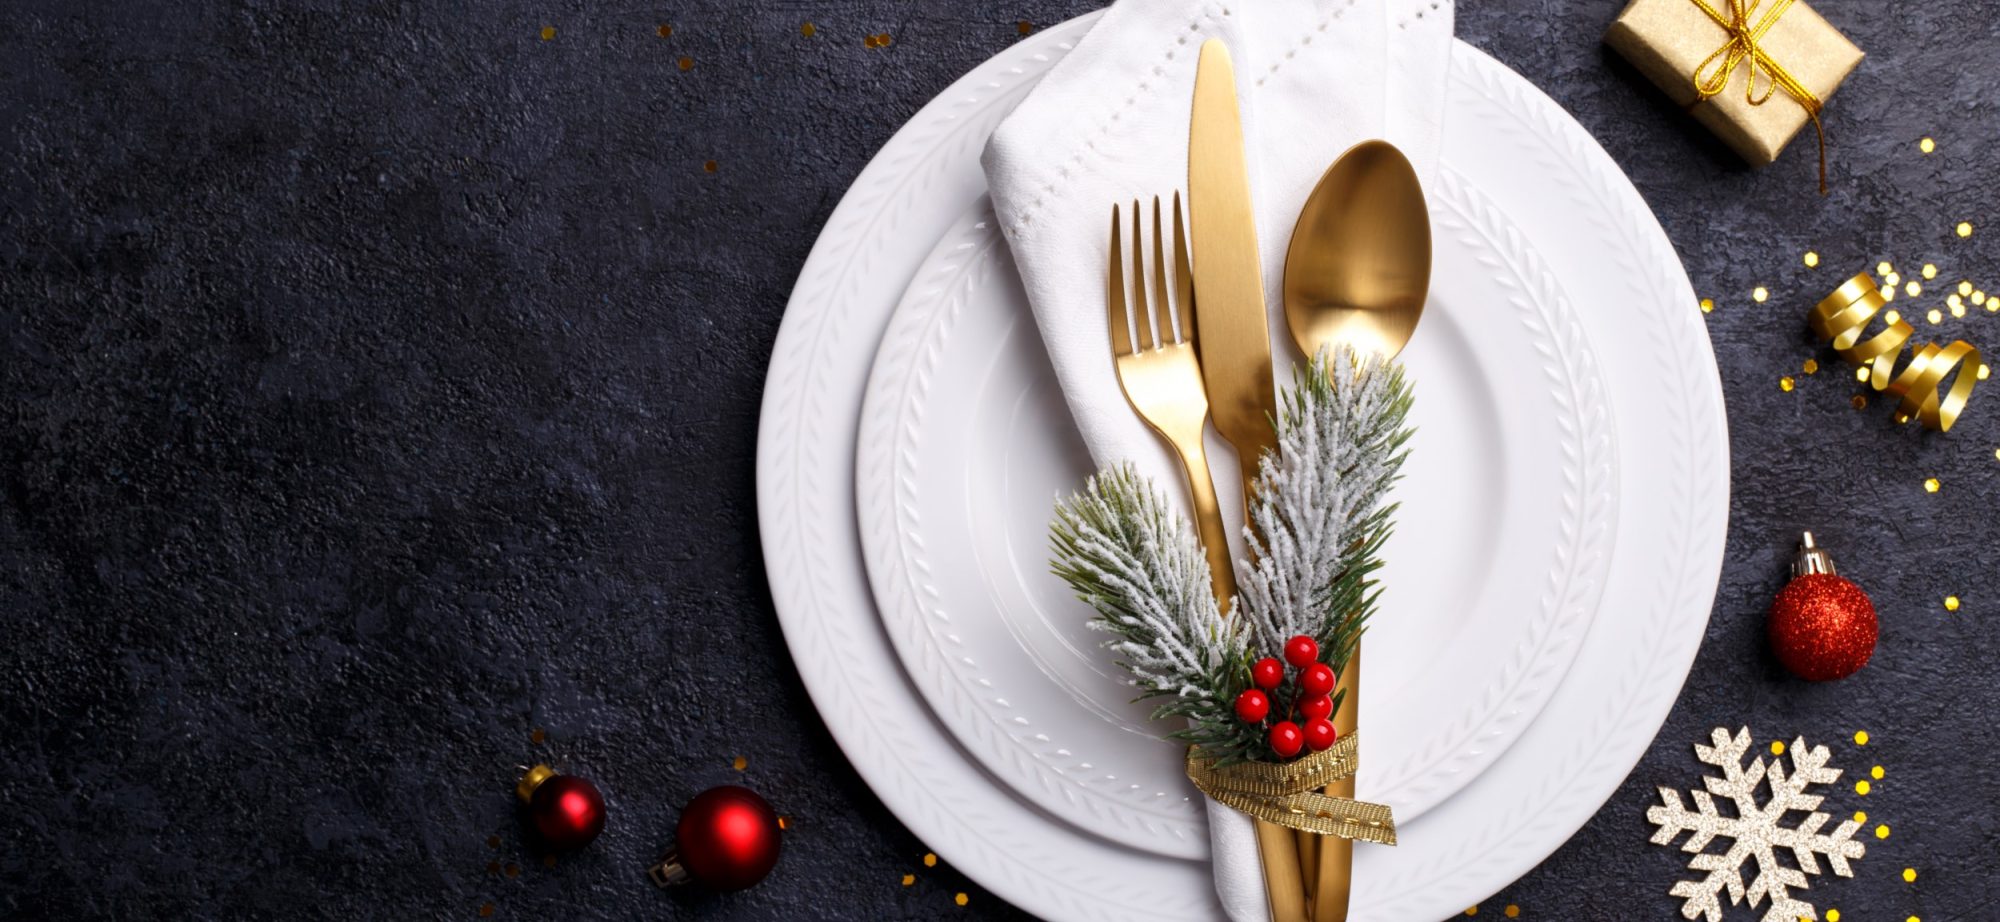 christmas-with-scenic-festive-table-setting-banner